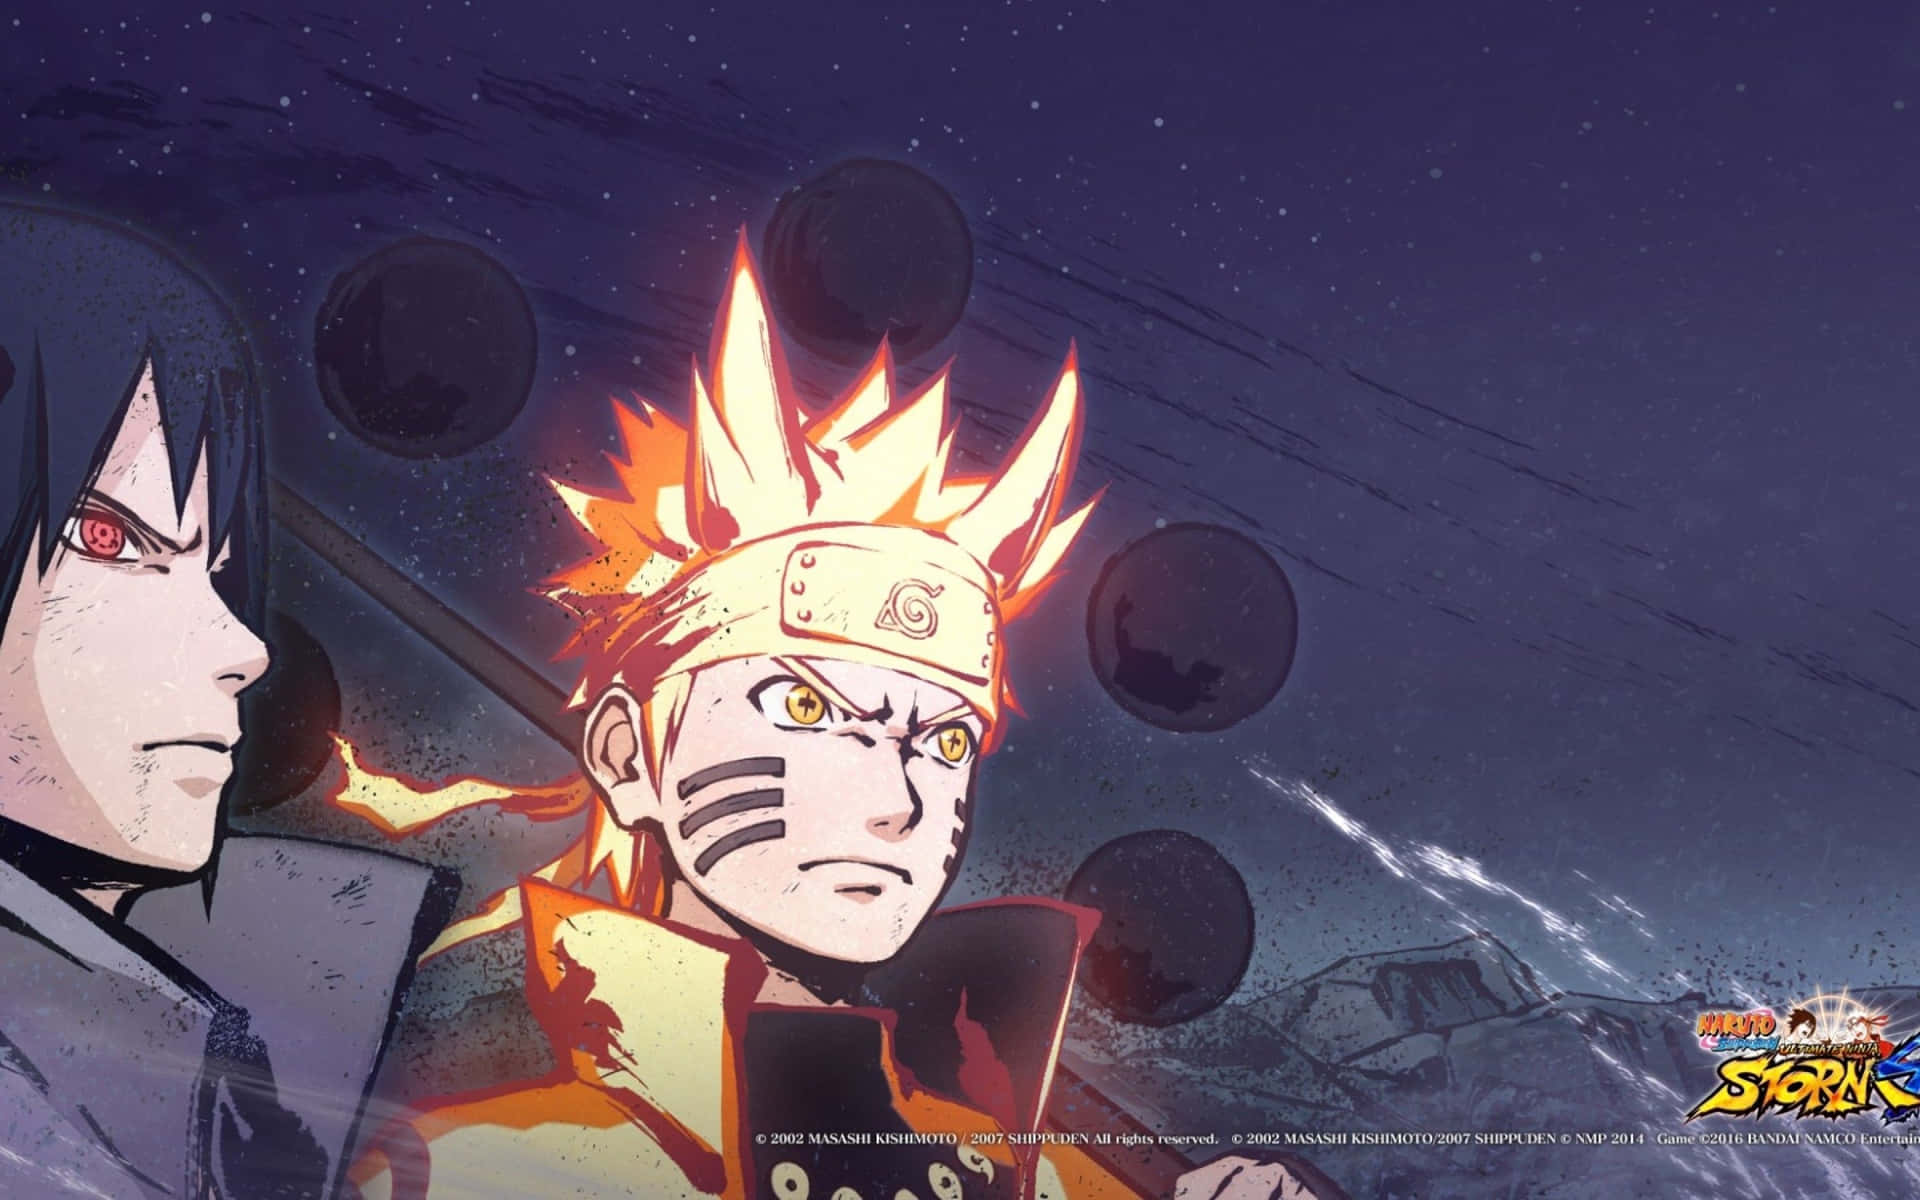 Take on your Tech Challenges with the Naruto Macbook Pro Wallpaper